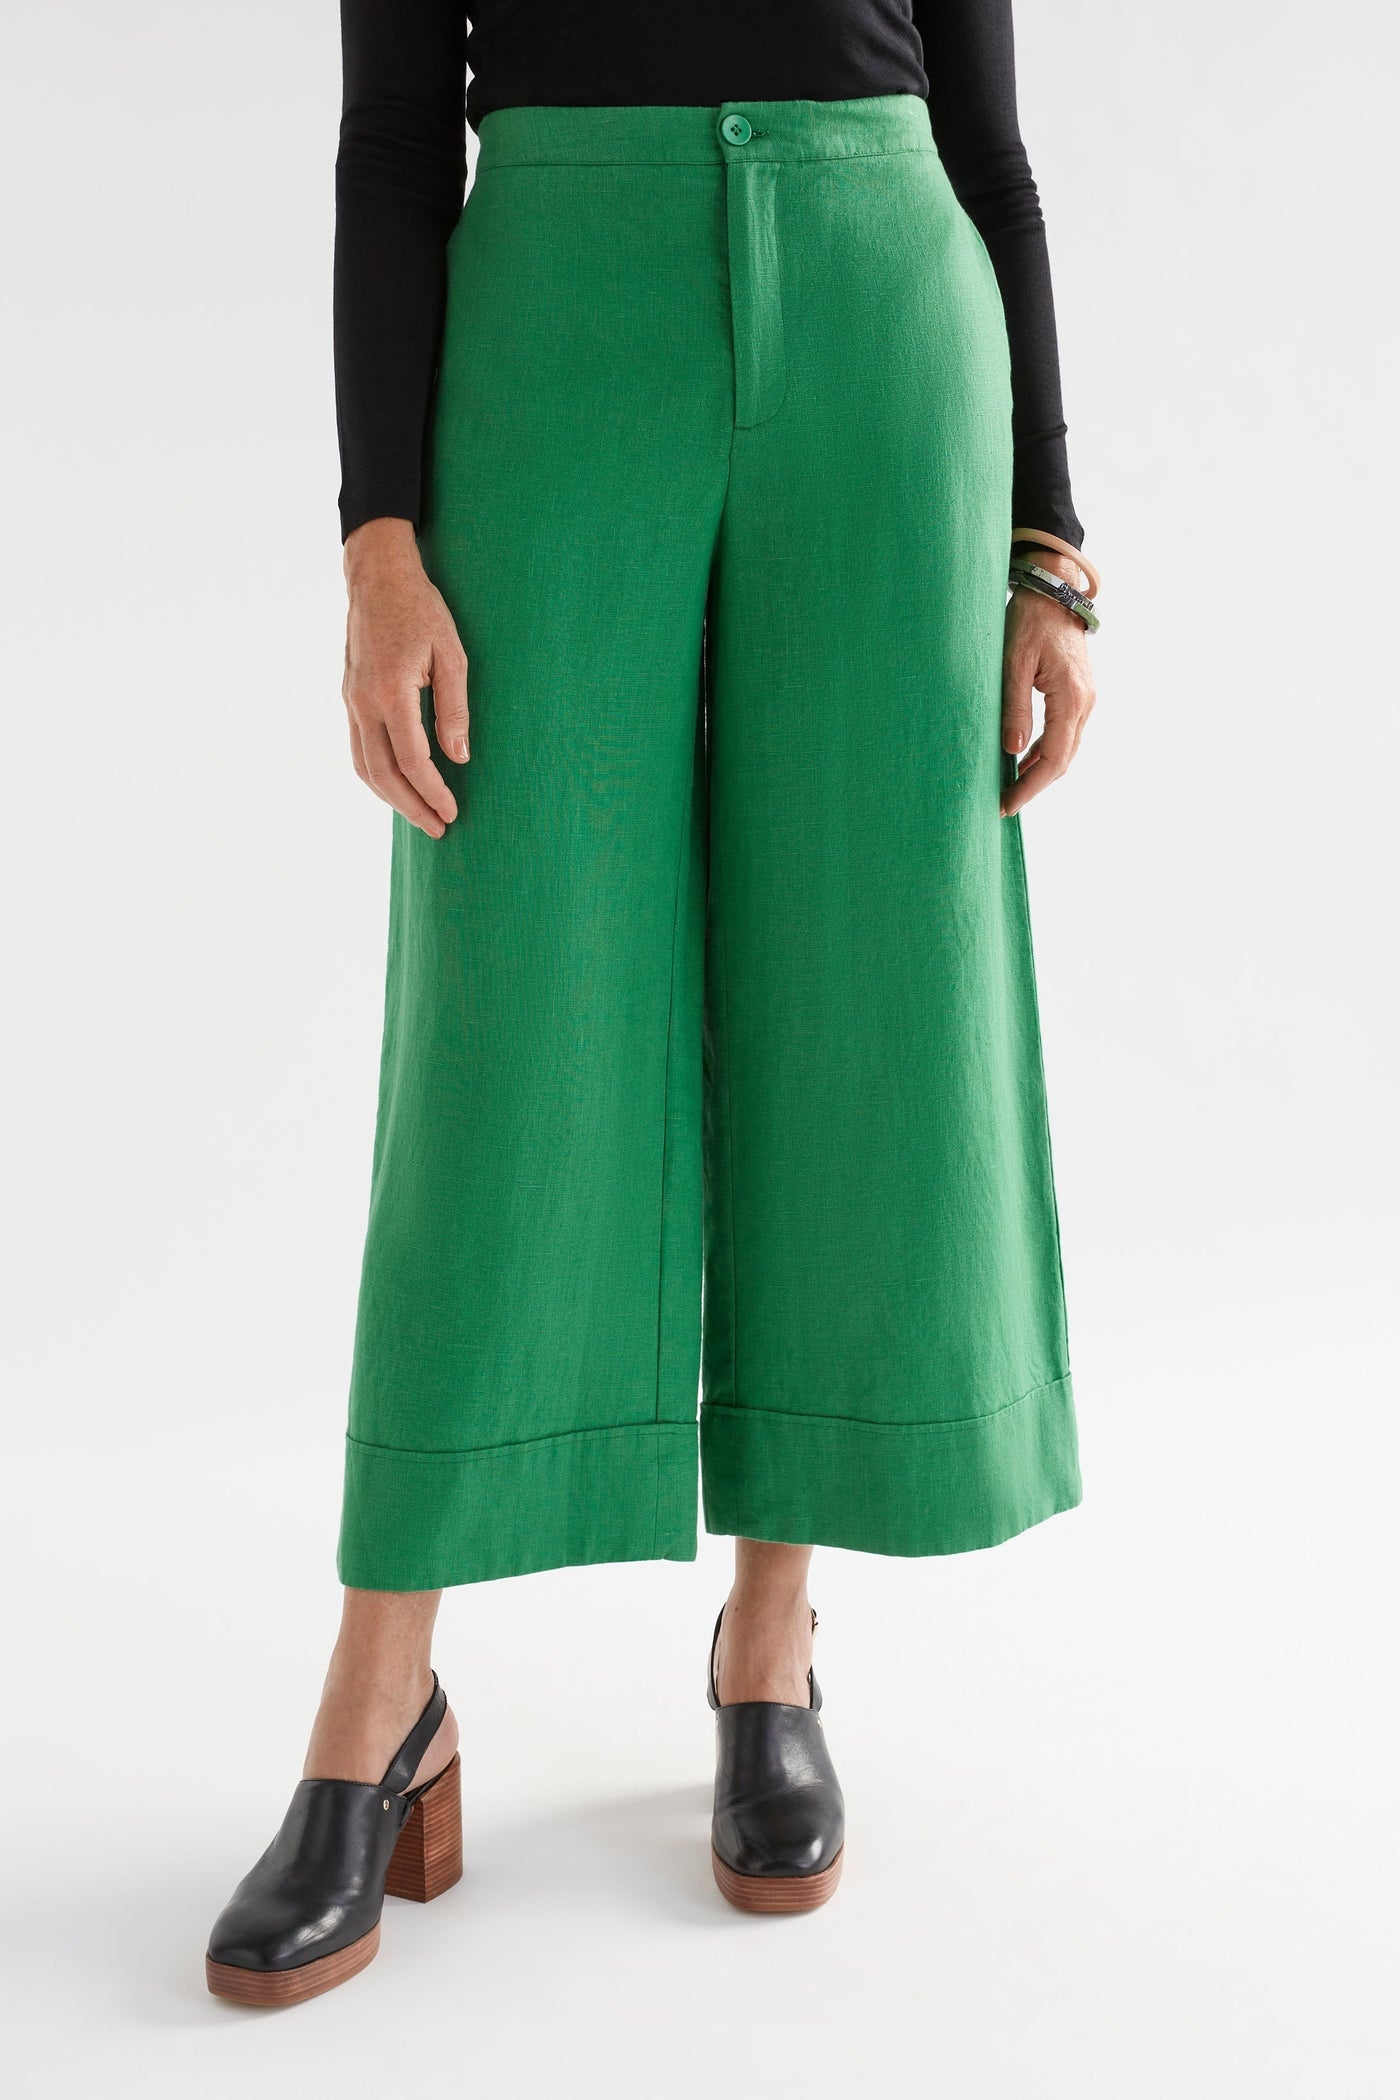 Elk the Label Anneli Pants in Ivy Green Colour